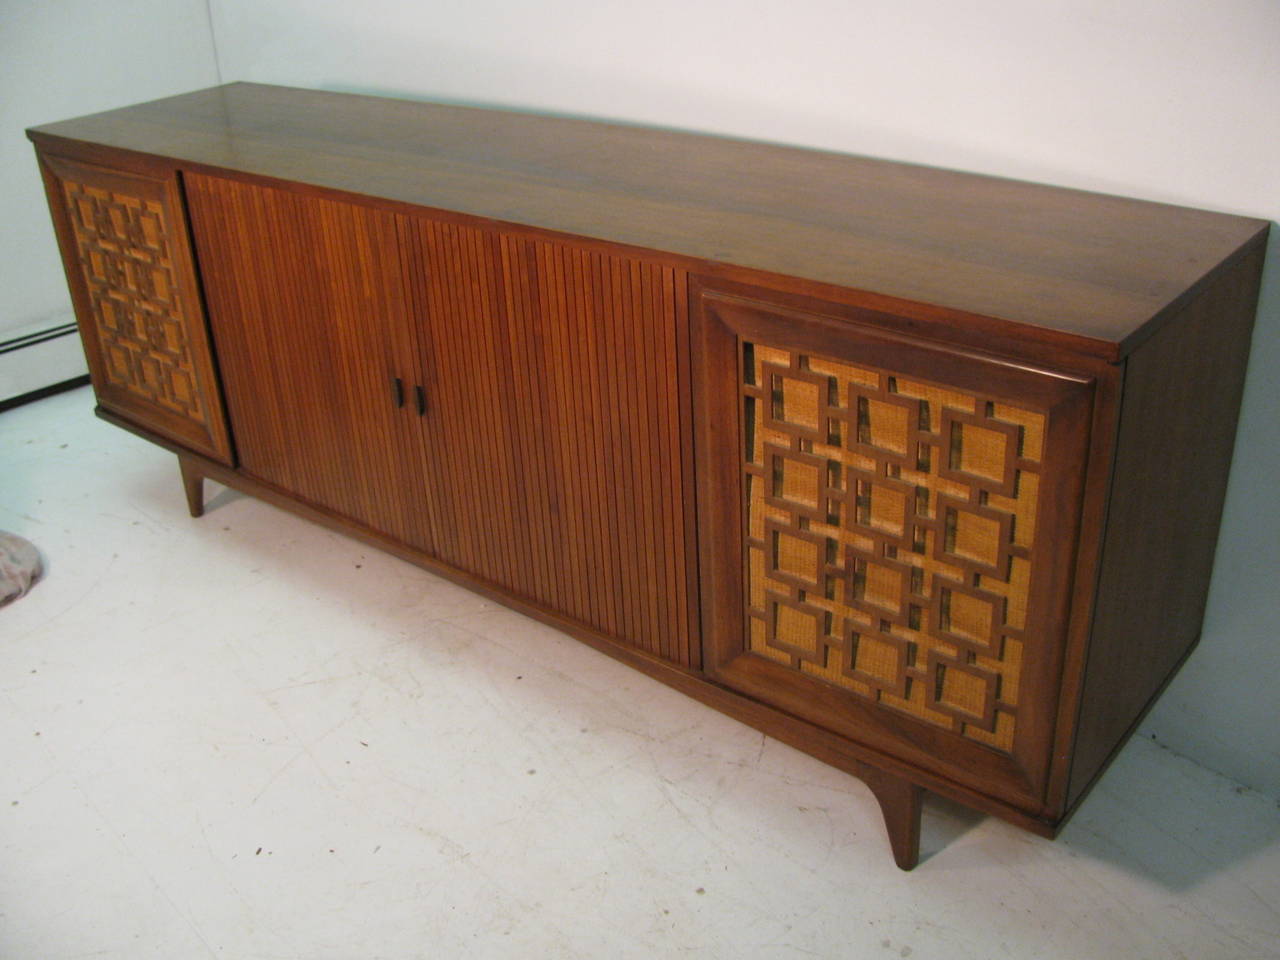 Beautiful large seven foot credenza, created from walnut with a centered pair of tambour doors. Credenza has one large door at the corners which open straight out. Adequate shelving is original. All inquiries please call or just press 